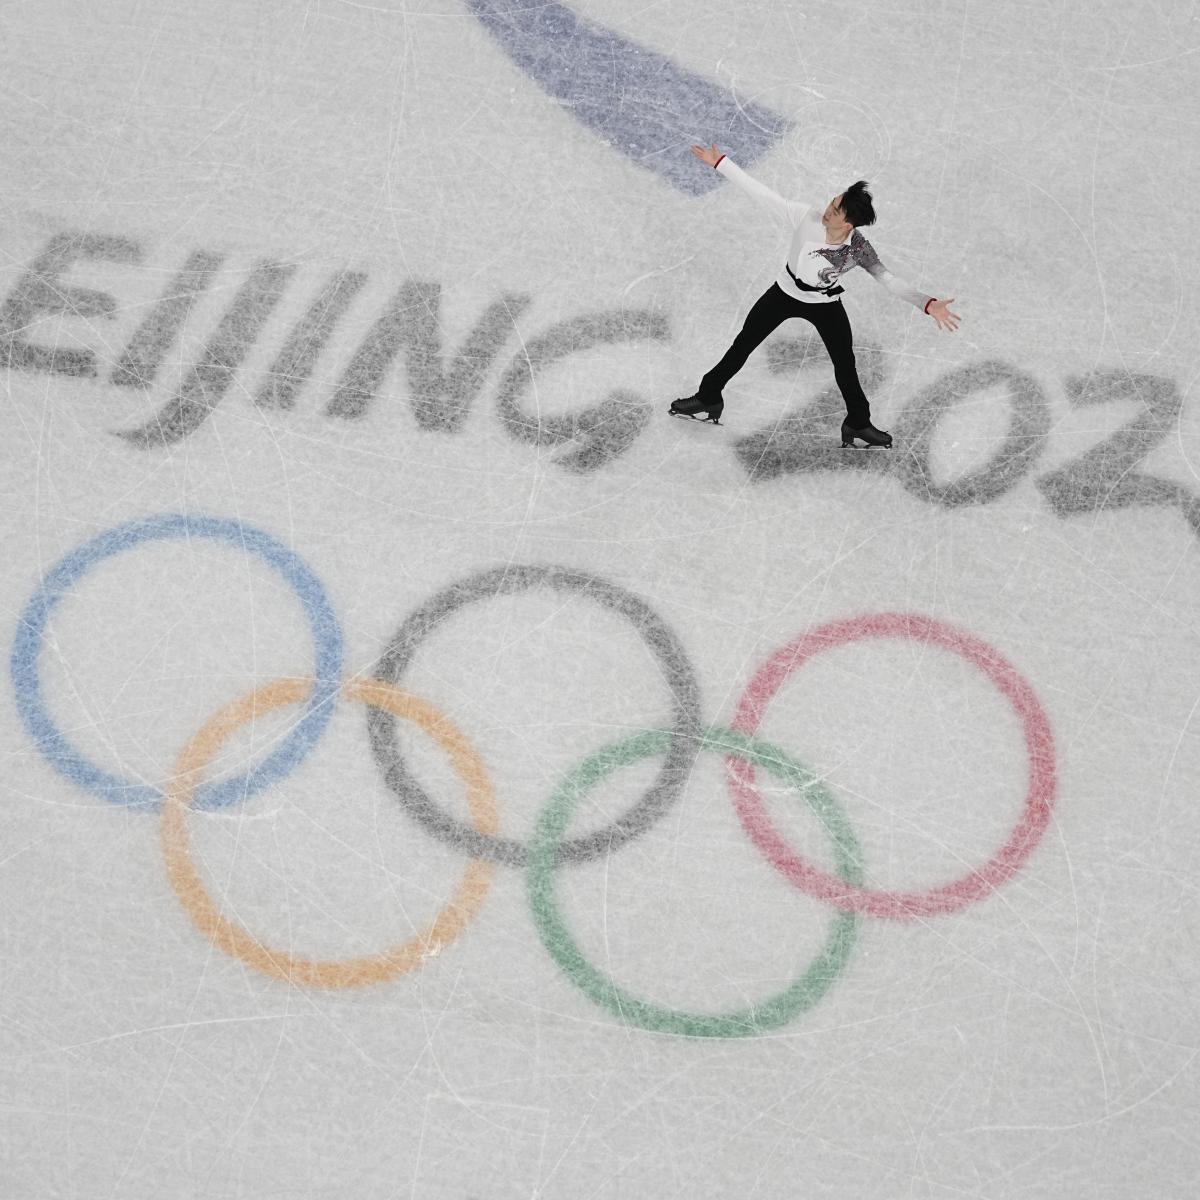 Olympic Figure Skating Schedule 2022 TV, Live Stream for Exhibition